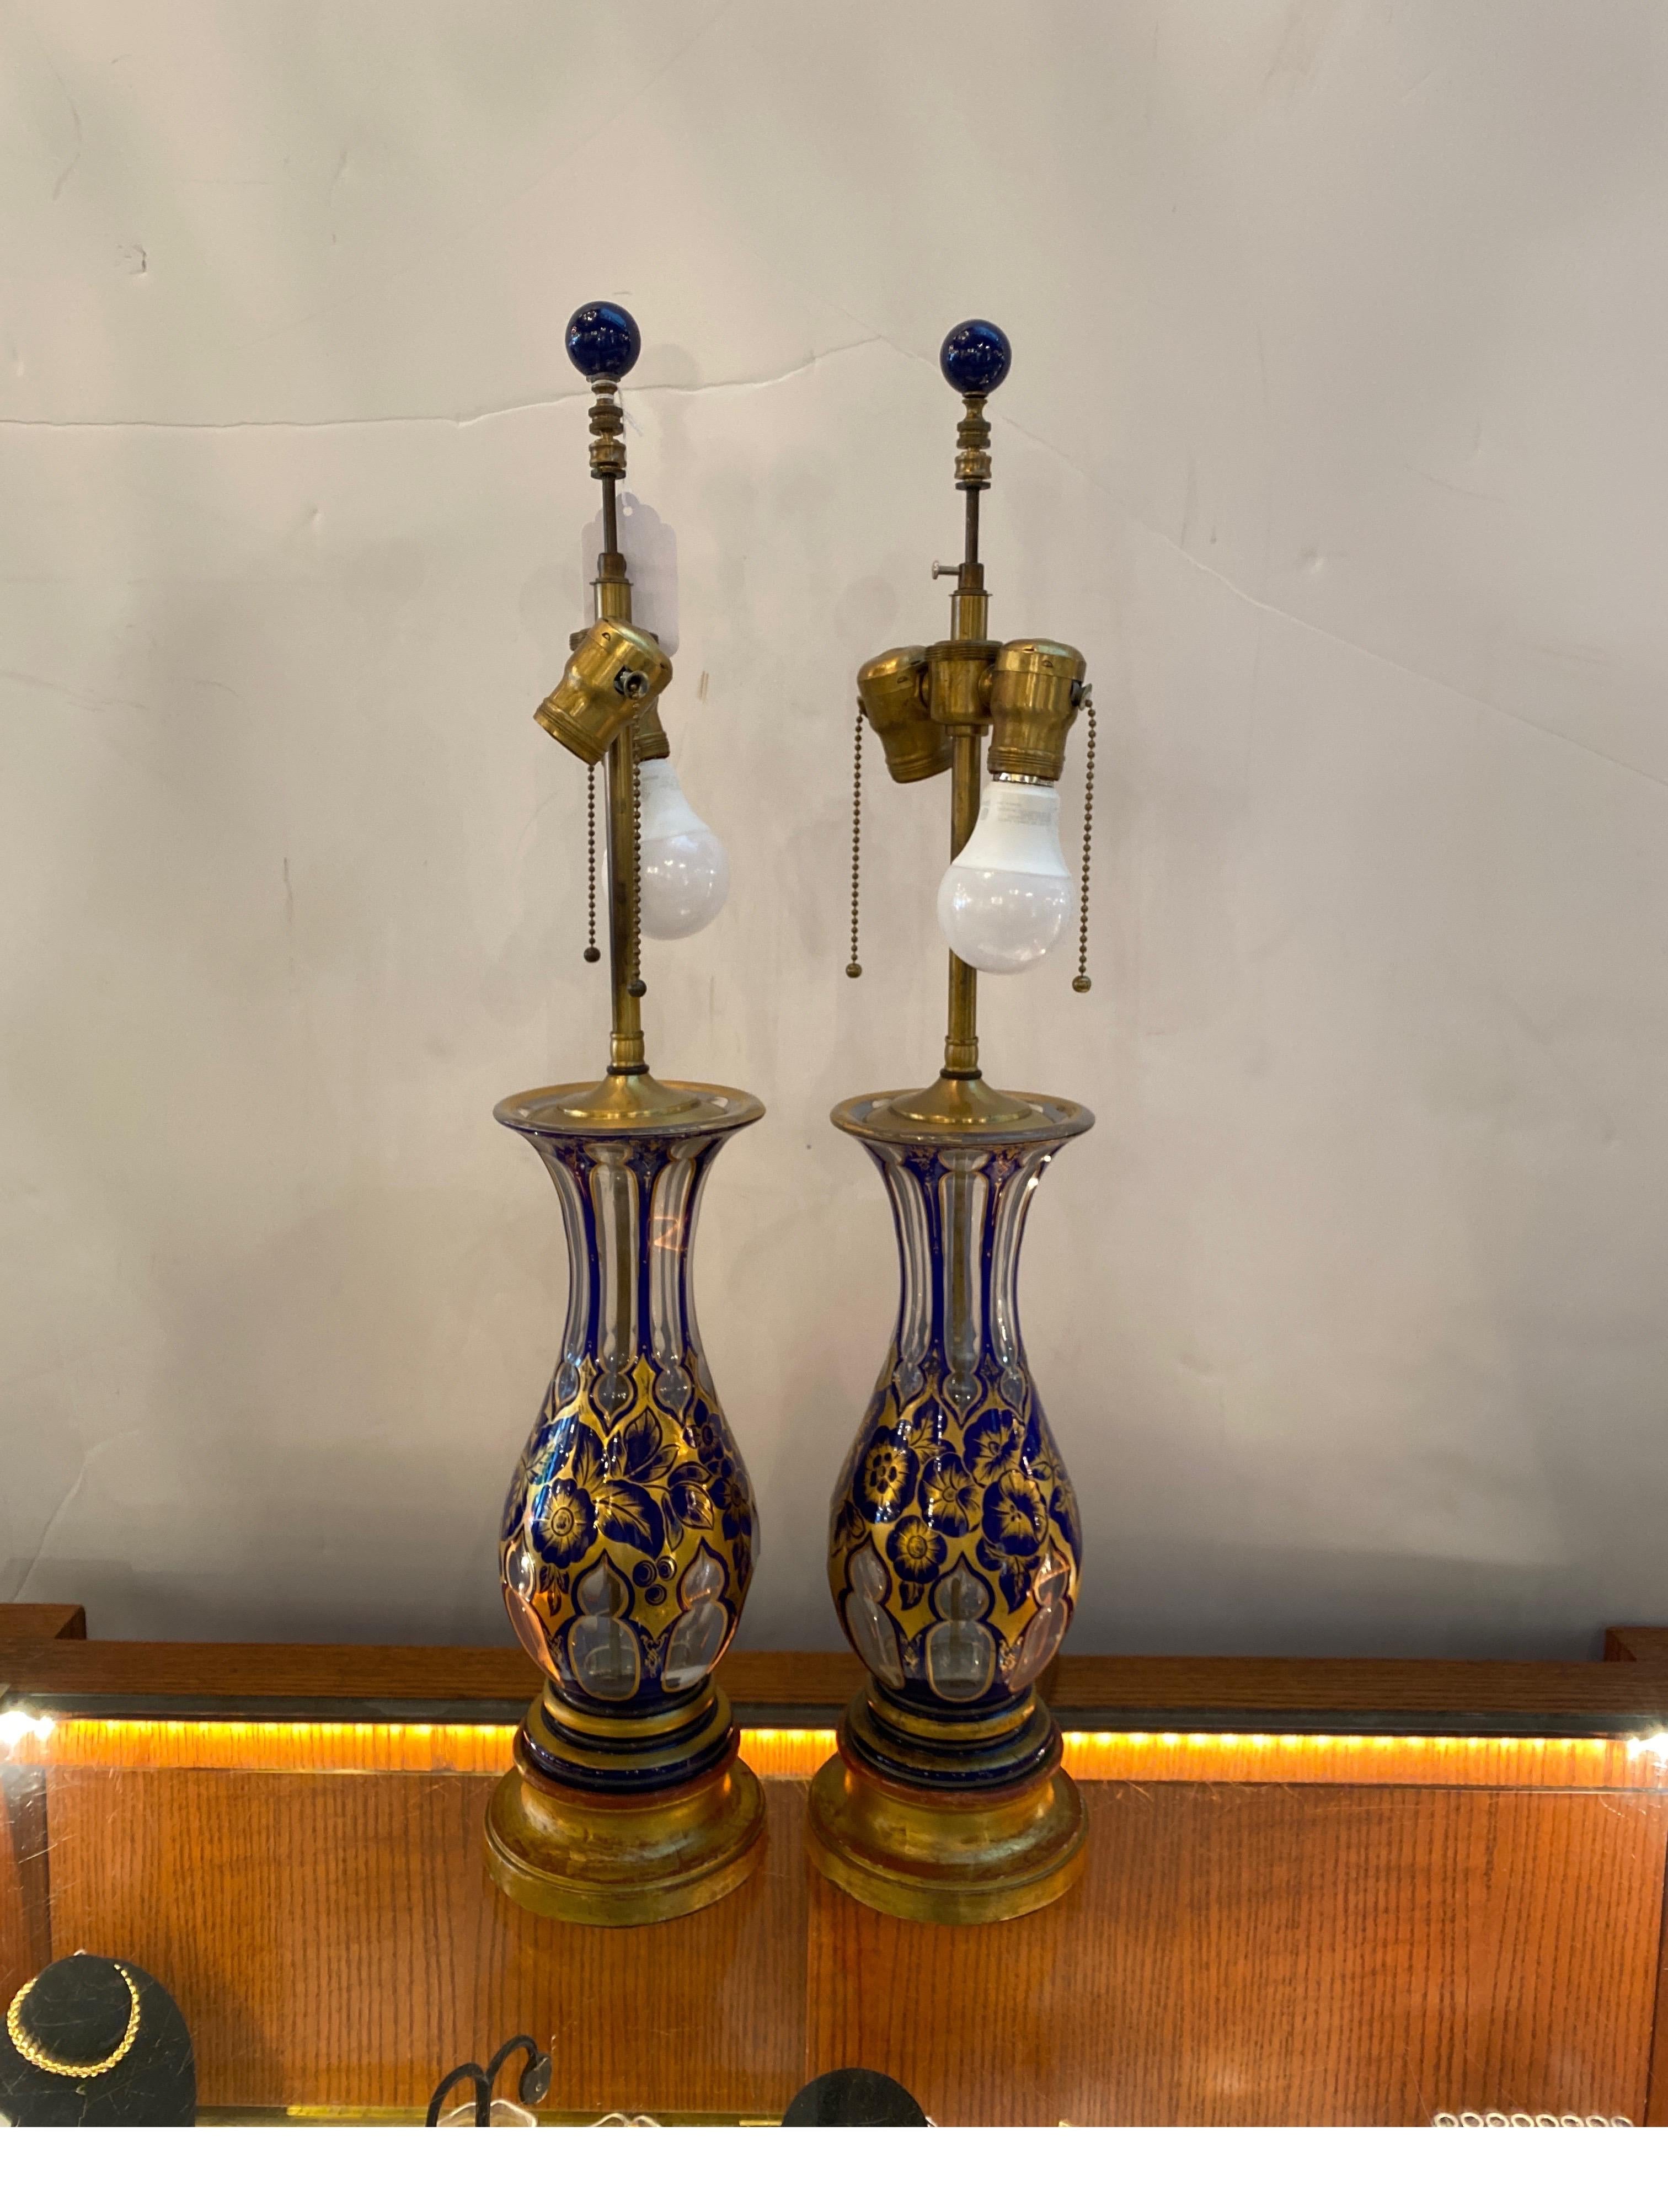 A pair or antique 19th Century cut glass vases as lamps.  The cobalt and gold top layer cut to a clear base.  The vases with early 20th Century gilt wood bases.  The center lamp rod with 2 working light sockets on pull chains.  The shades are for